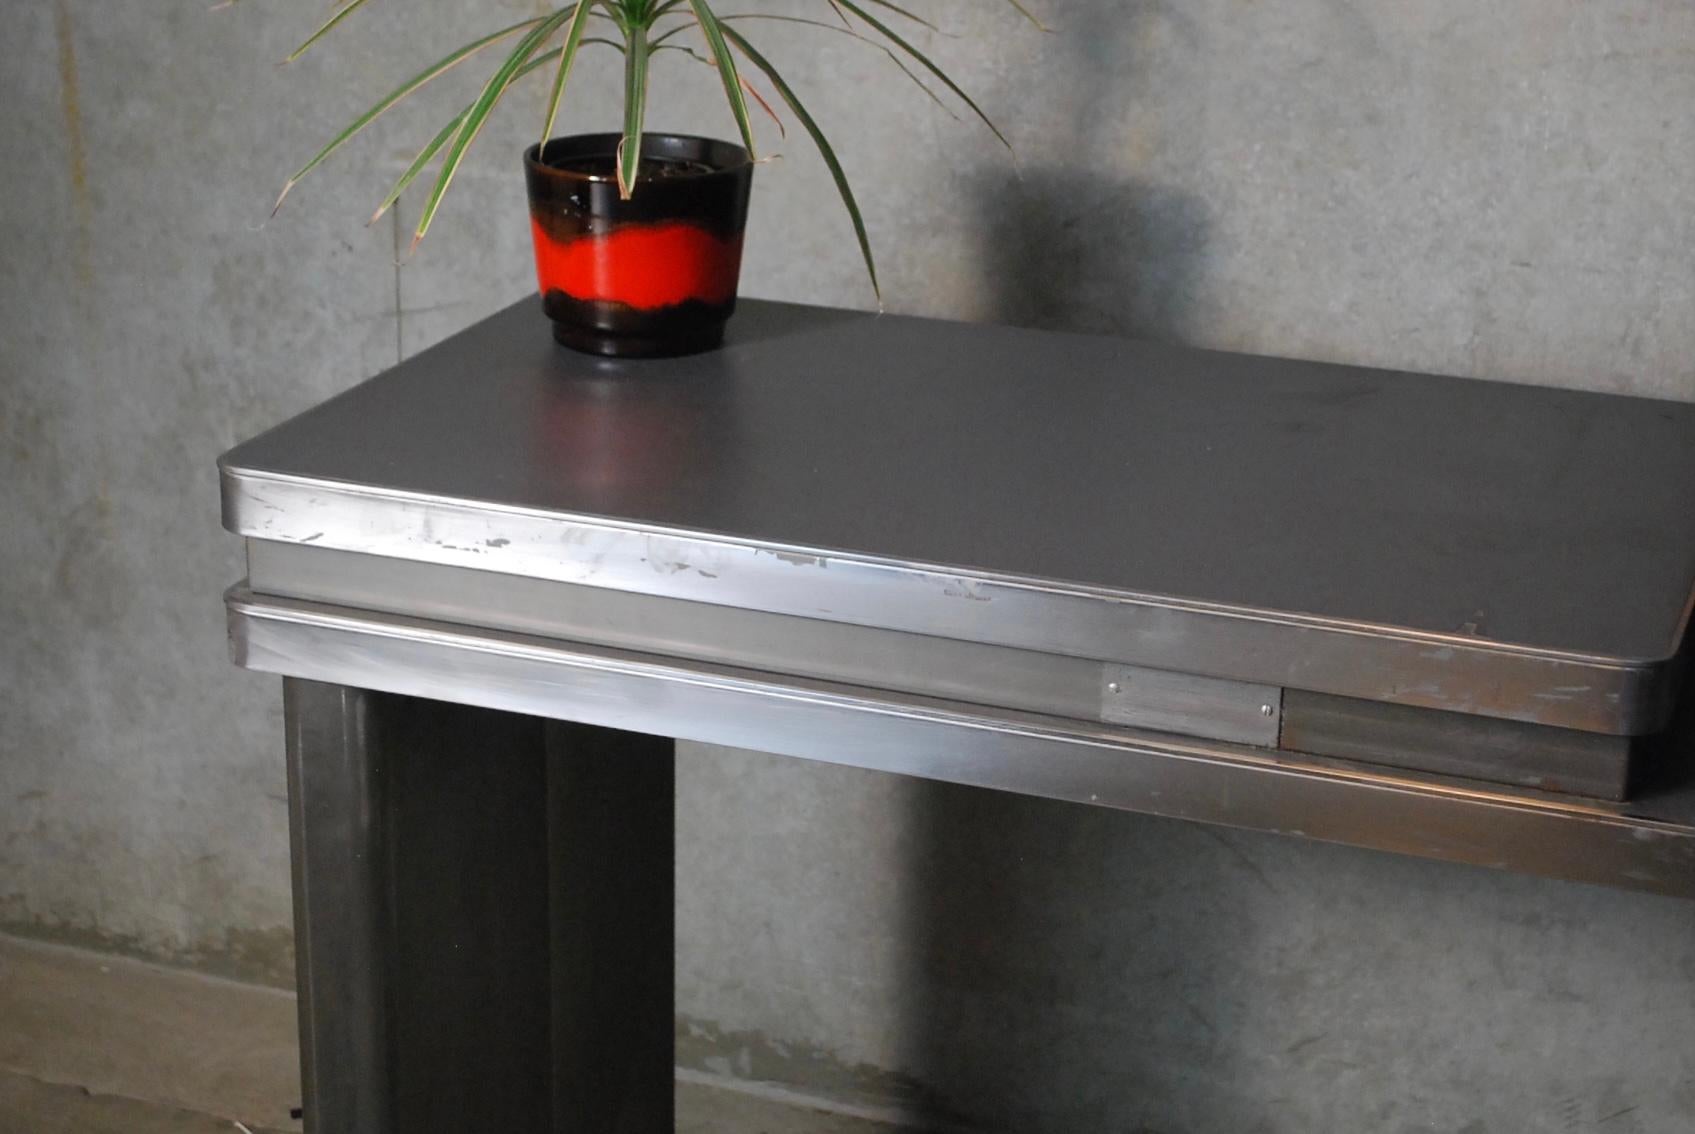 Metal console produced and signed by globe Wernicke with unusual extra top height and adjustable legs.
The legs can move inward or outward depending on use and preference. Solid piece retaining original top and brushed steel finish.